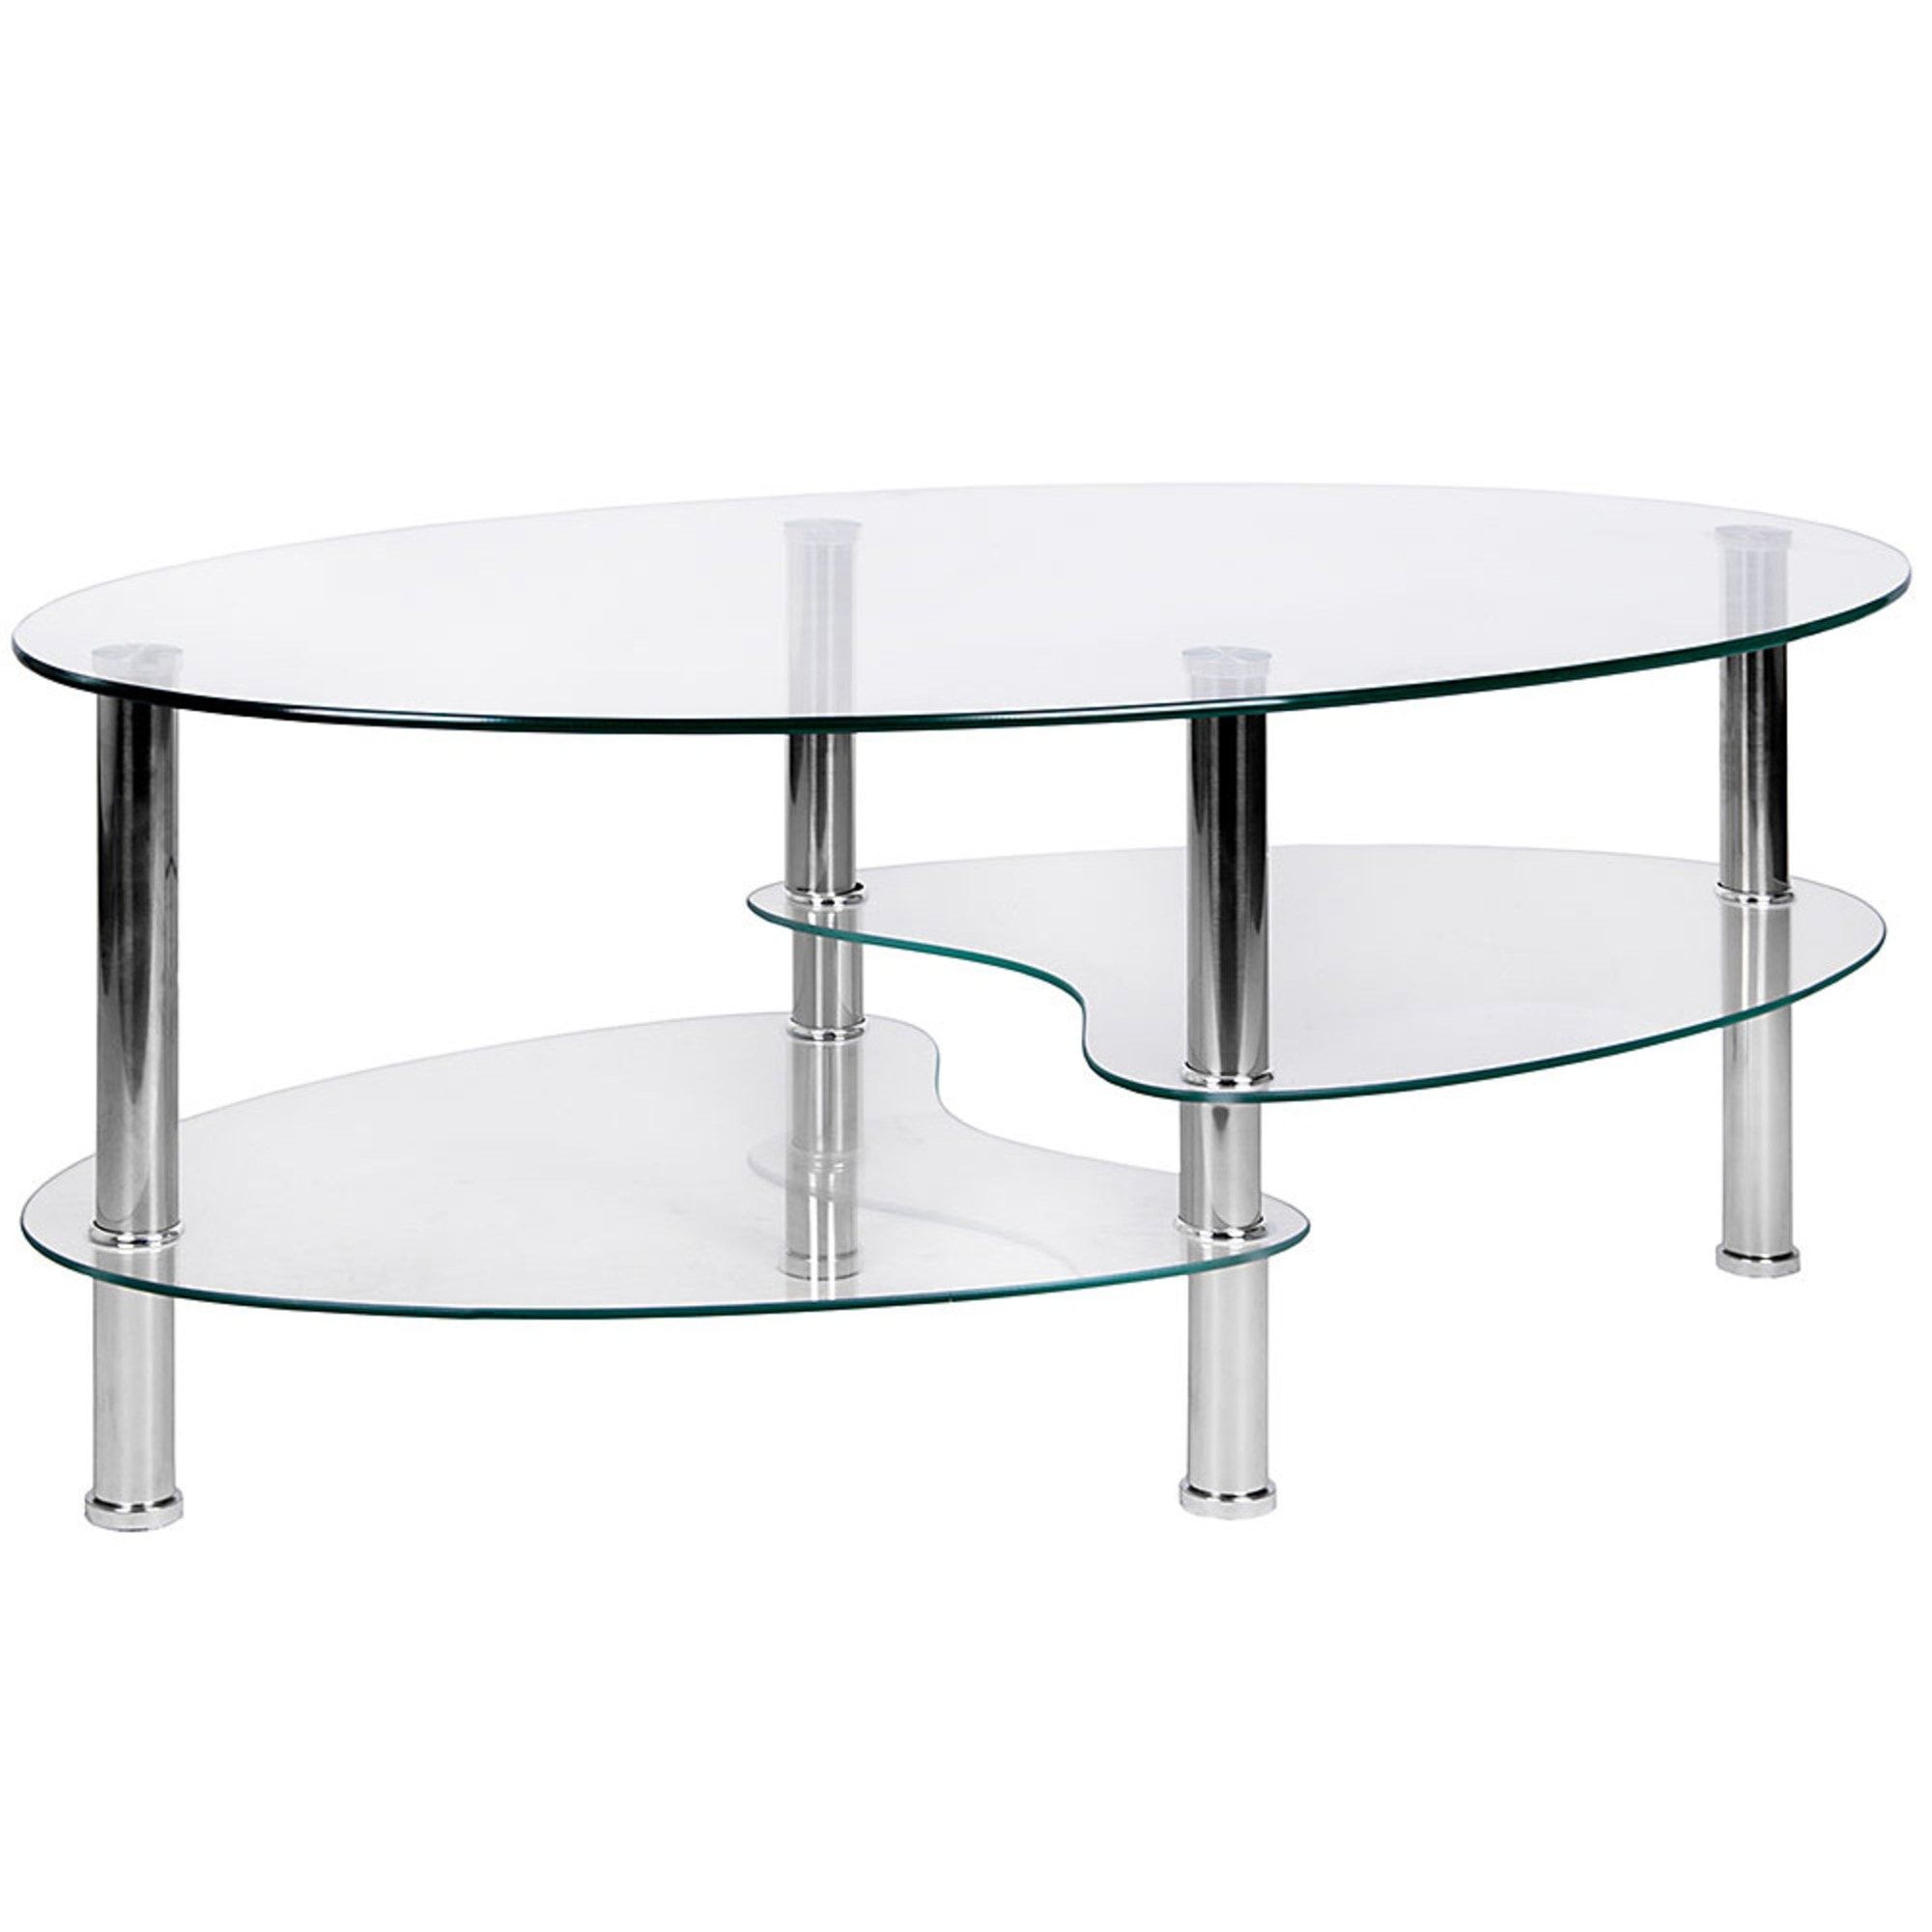 Cara Oval Clear Glass Coffee Table | Dining | Glass Furniture Pertaining To Oval Glass Coffee Tables (View 12 of 20)